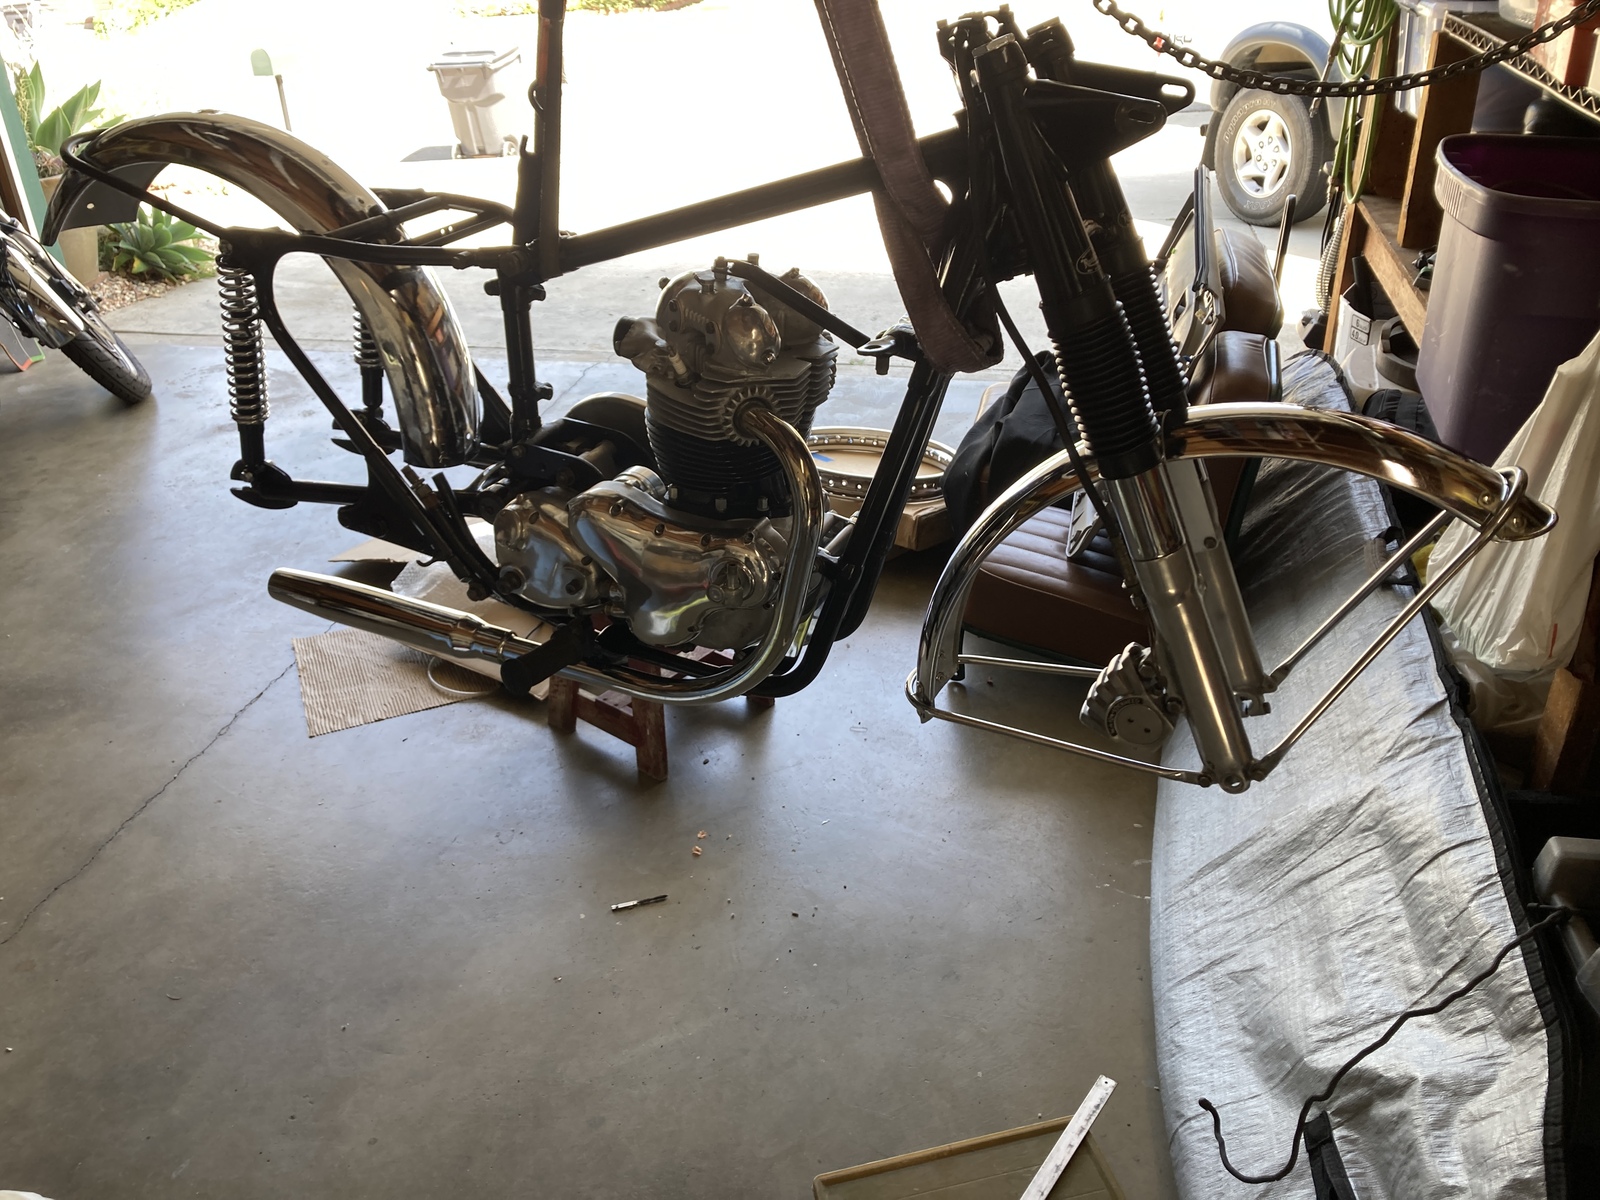 '66 N15 coming together